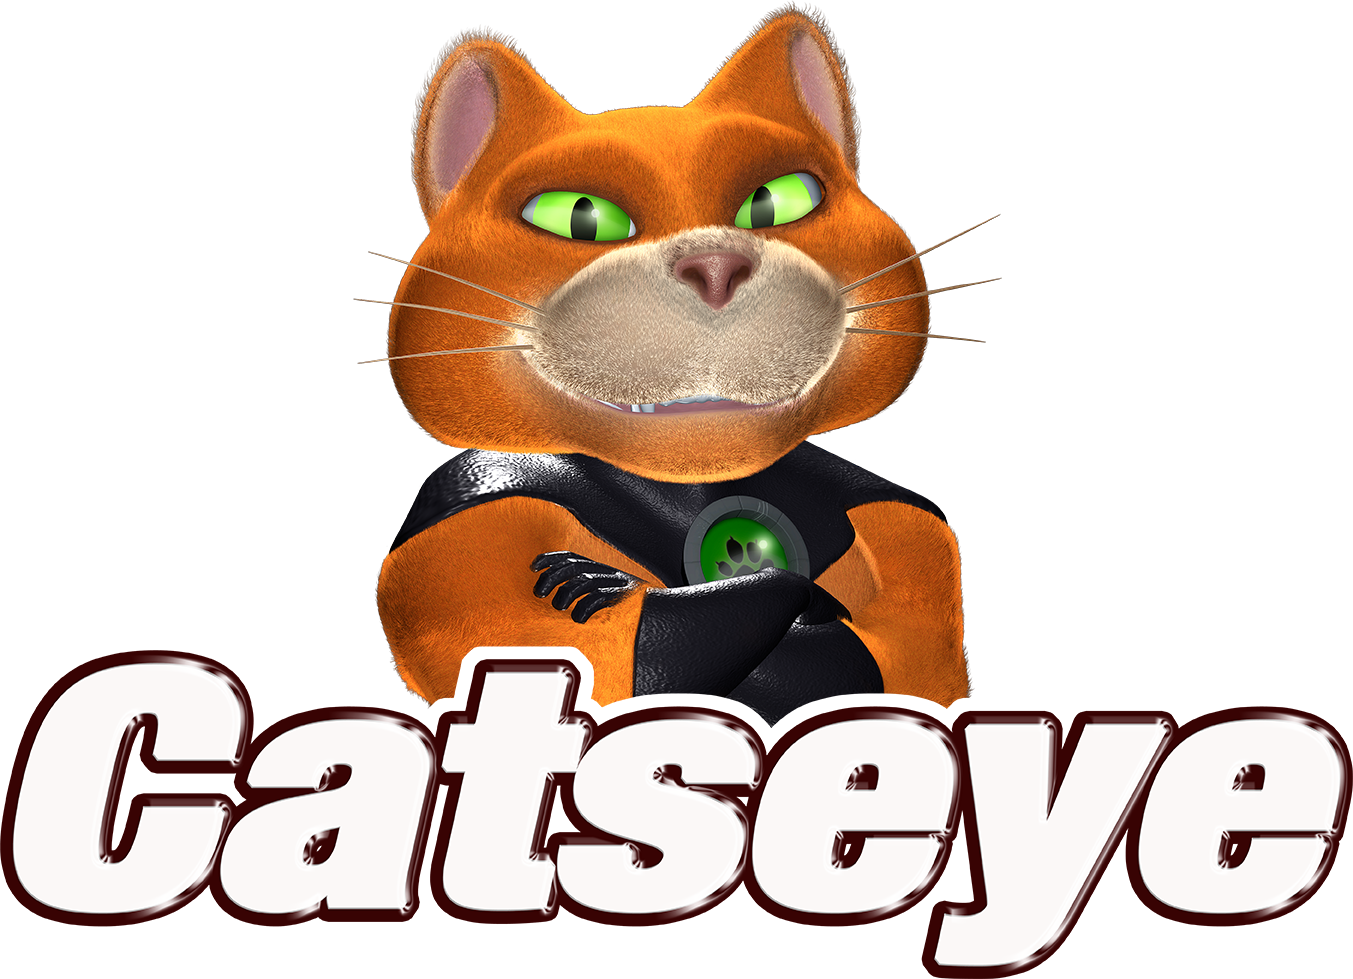 Catseye Pest Control Announces New Location in Southwest Florida, Bringing New Jobs to Region